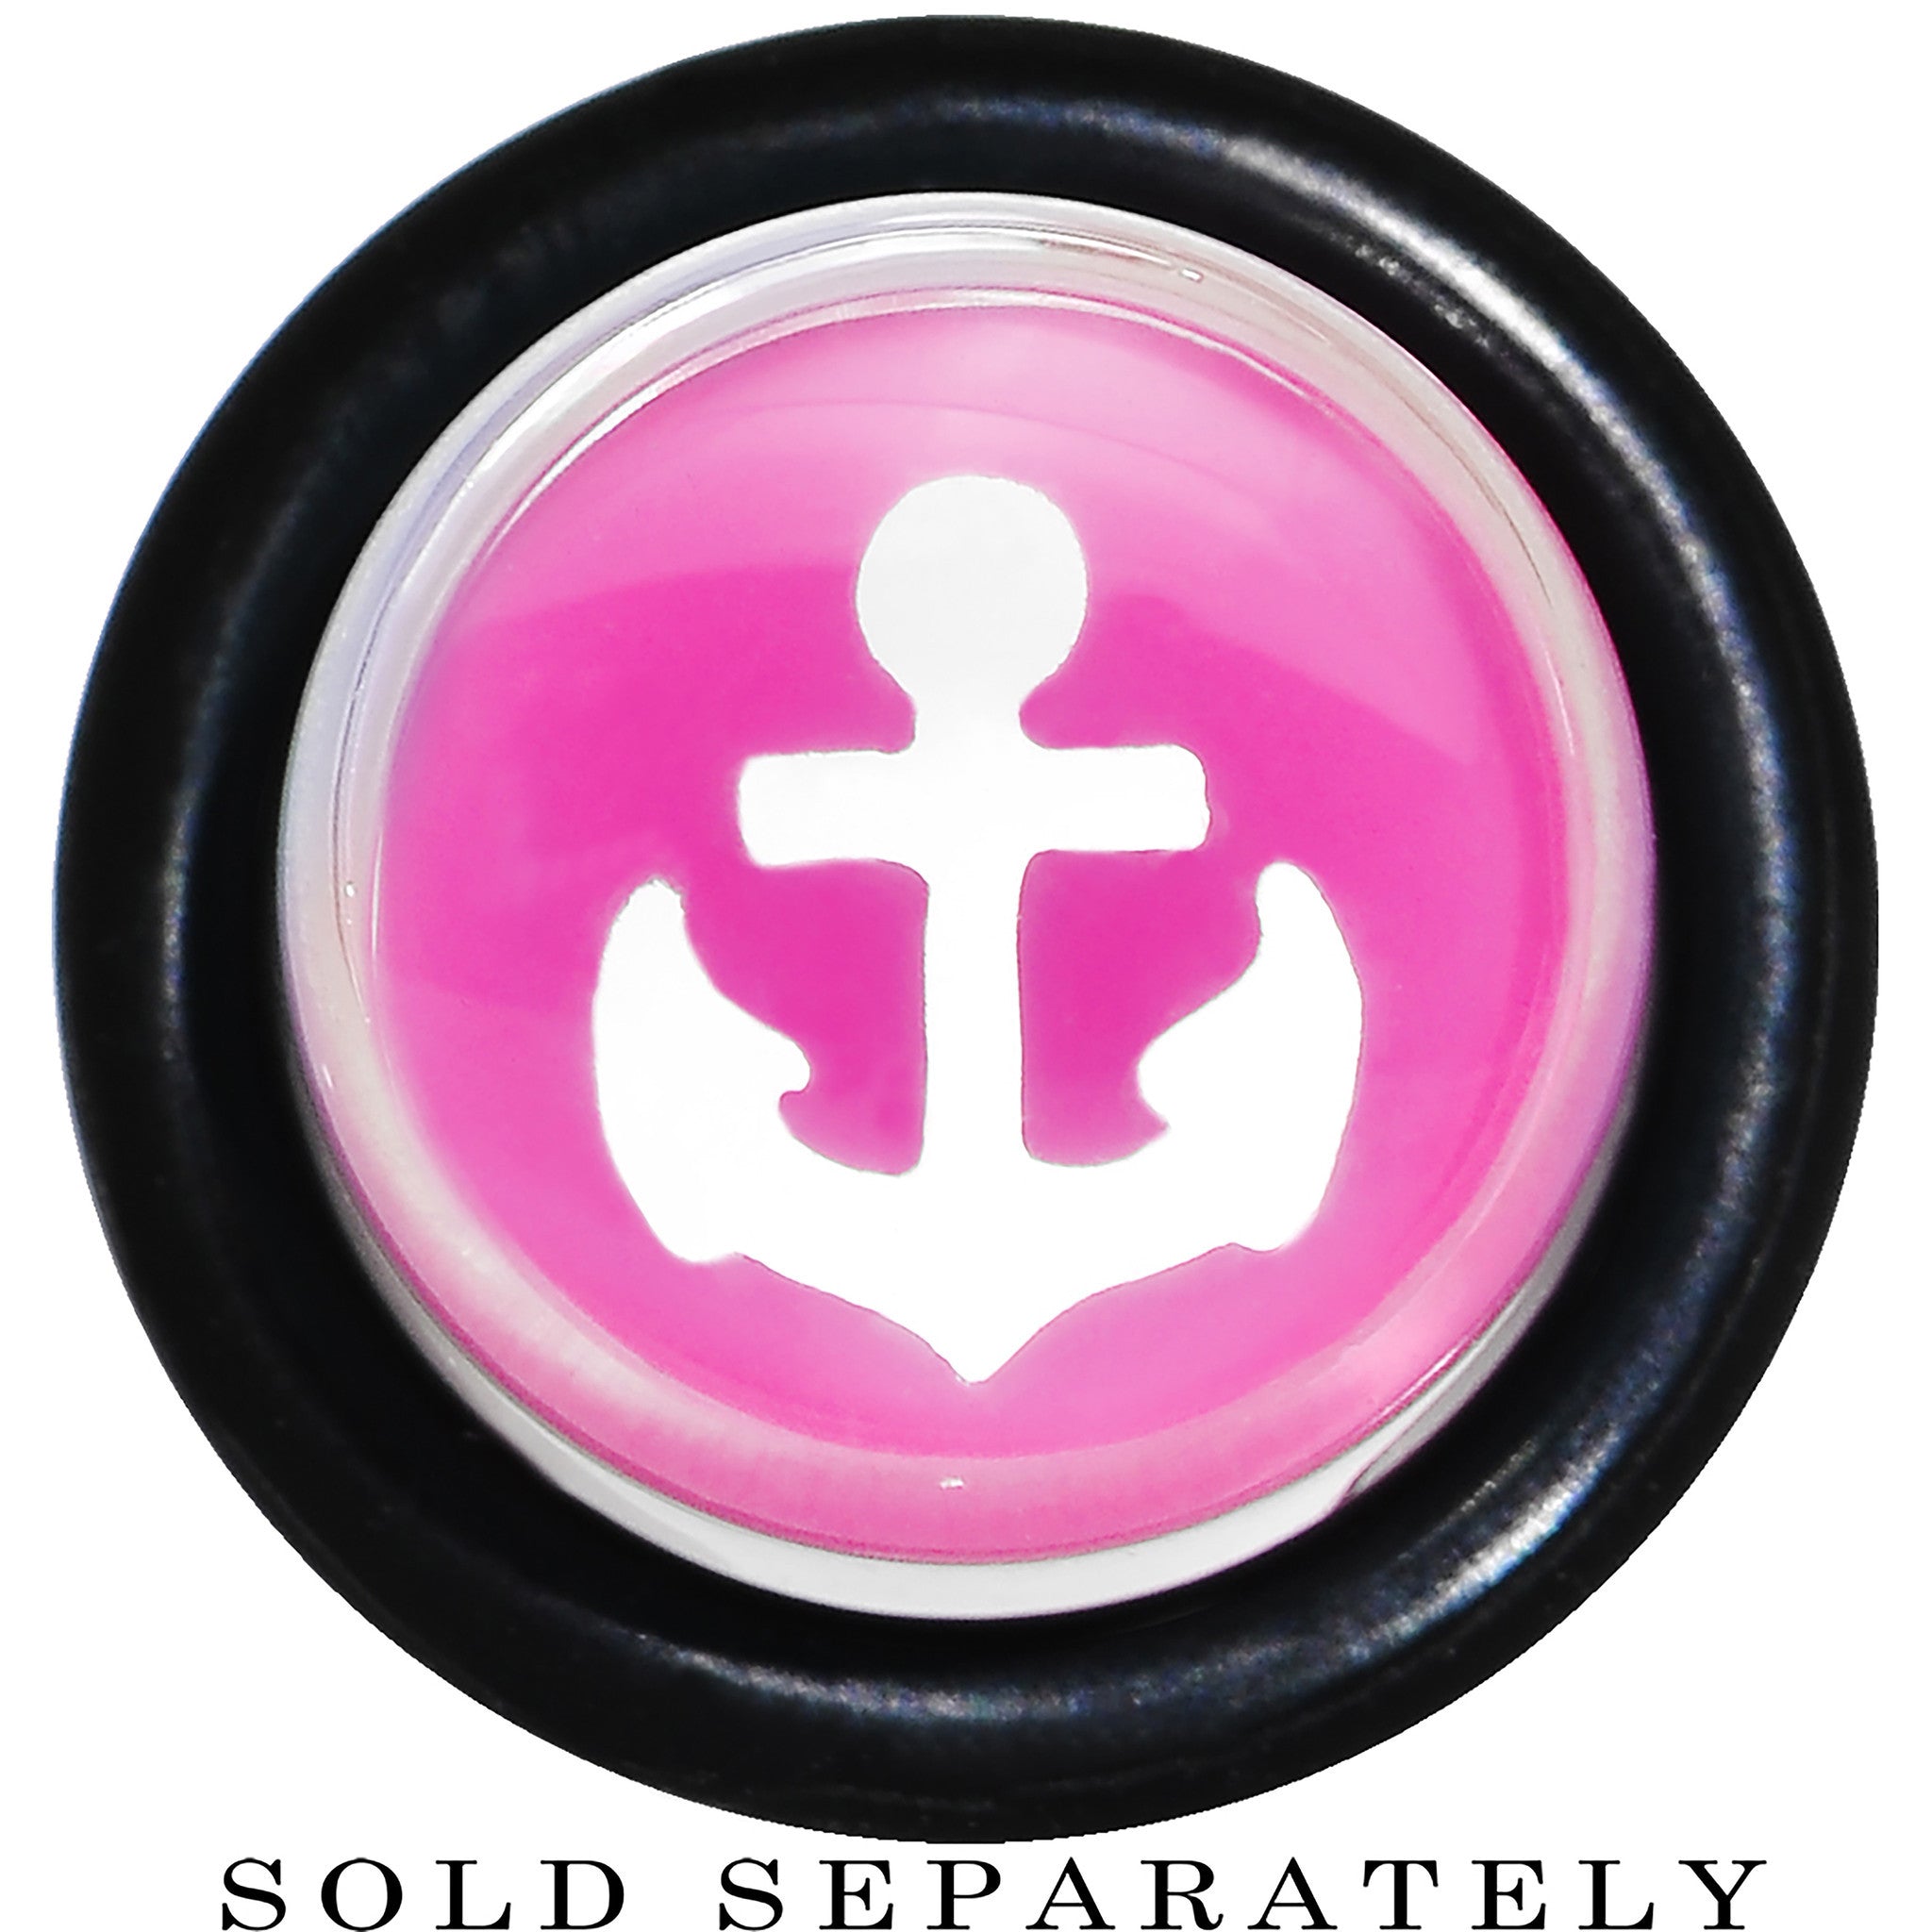 00 Gauge Clear Pink Acrylic Set Sail Nautical Anchor Taper